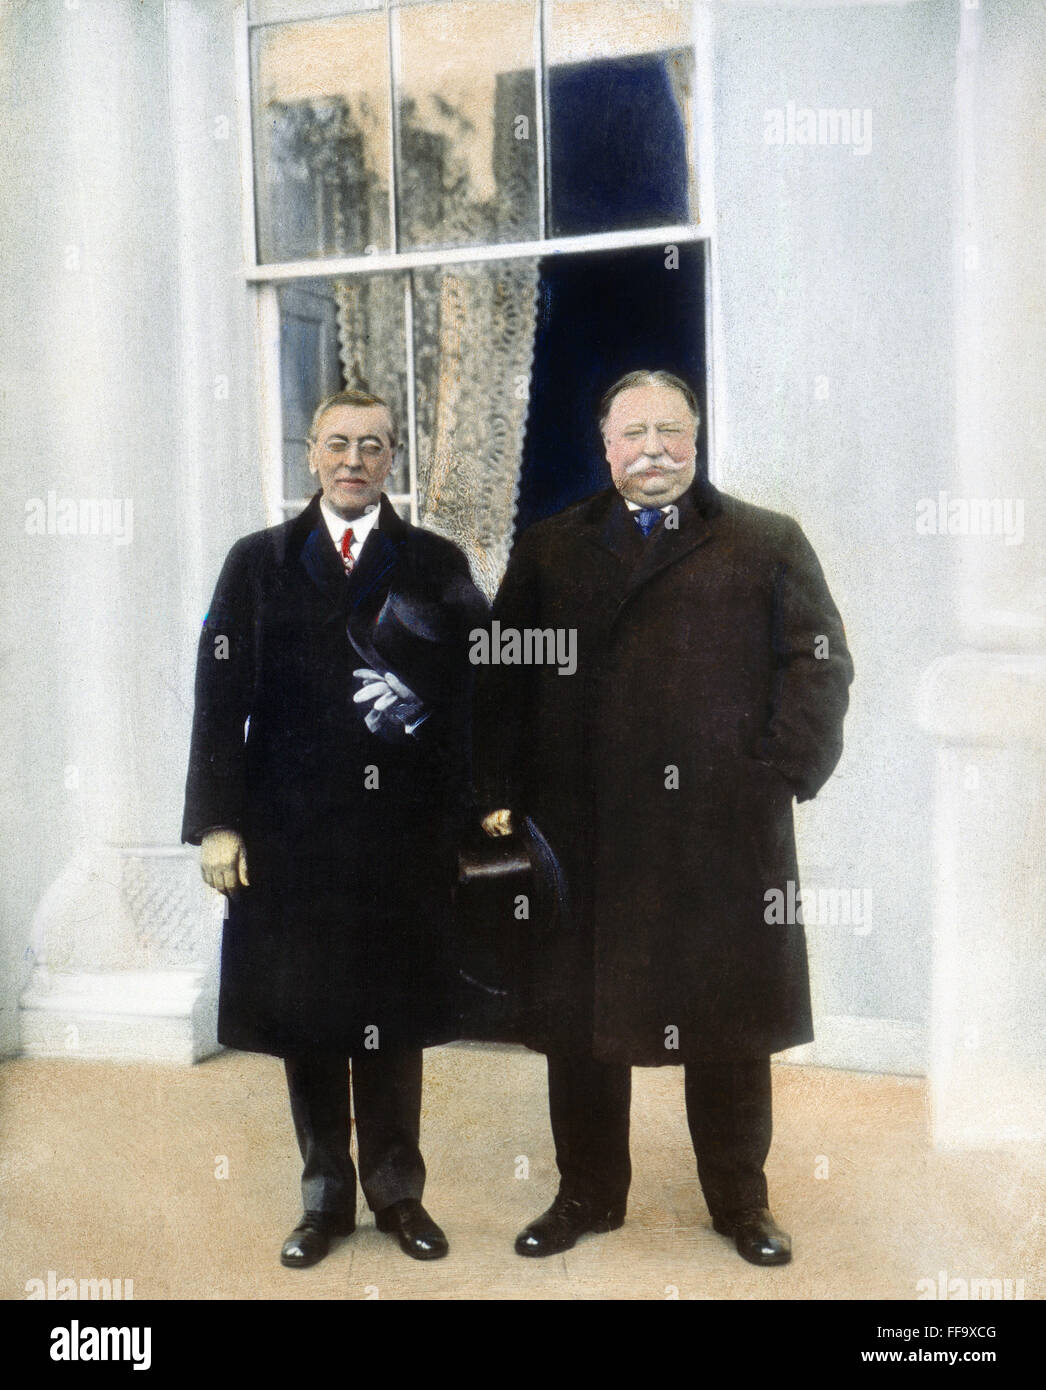 WILSON & TAFT: WHITE HOUSE. /nPresident-elect Woodrow Wilson (left) and outgoing President William Howard Taft at the White House, Washington, D.C., on Inauguration Day, 4 March 1913: oil over a photograph. Stock Photo